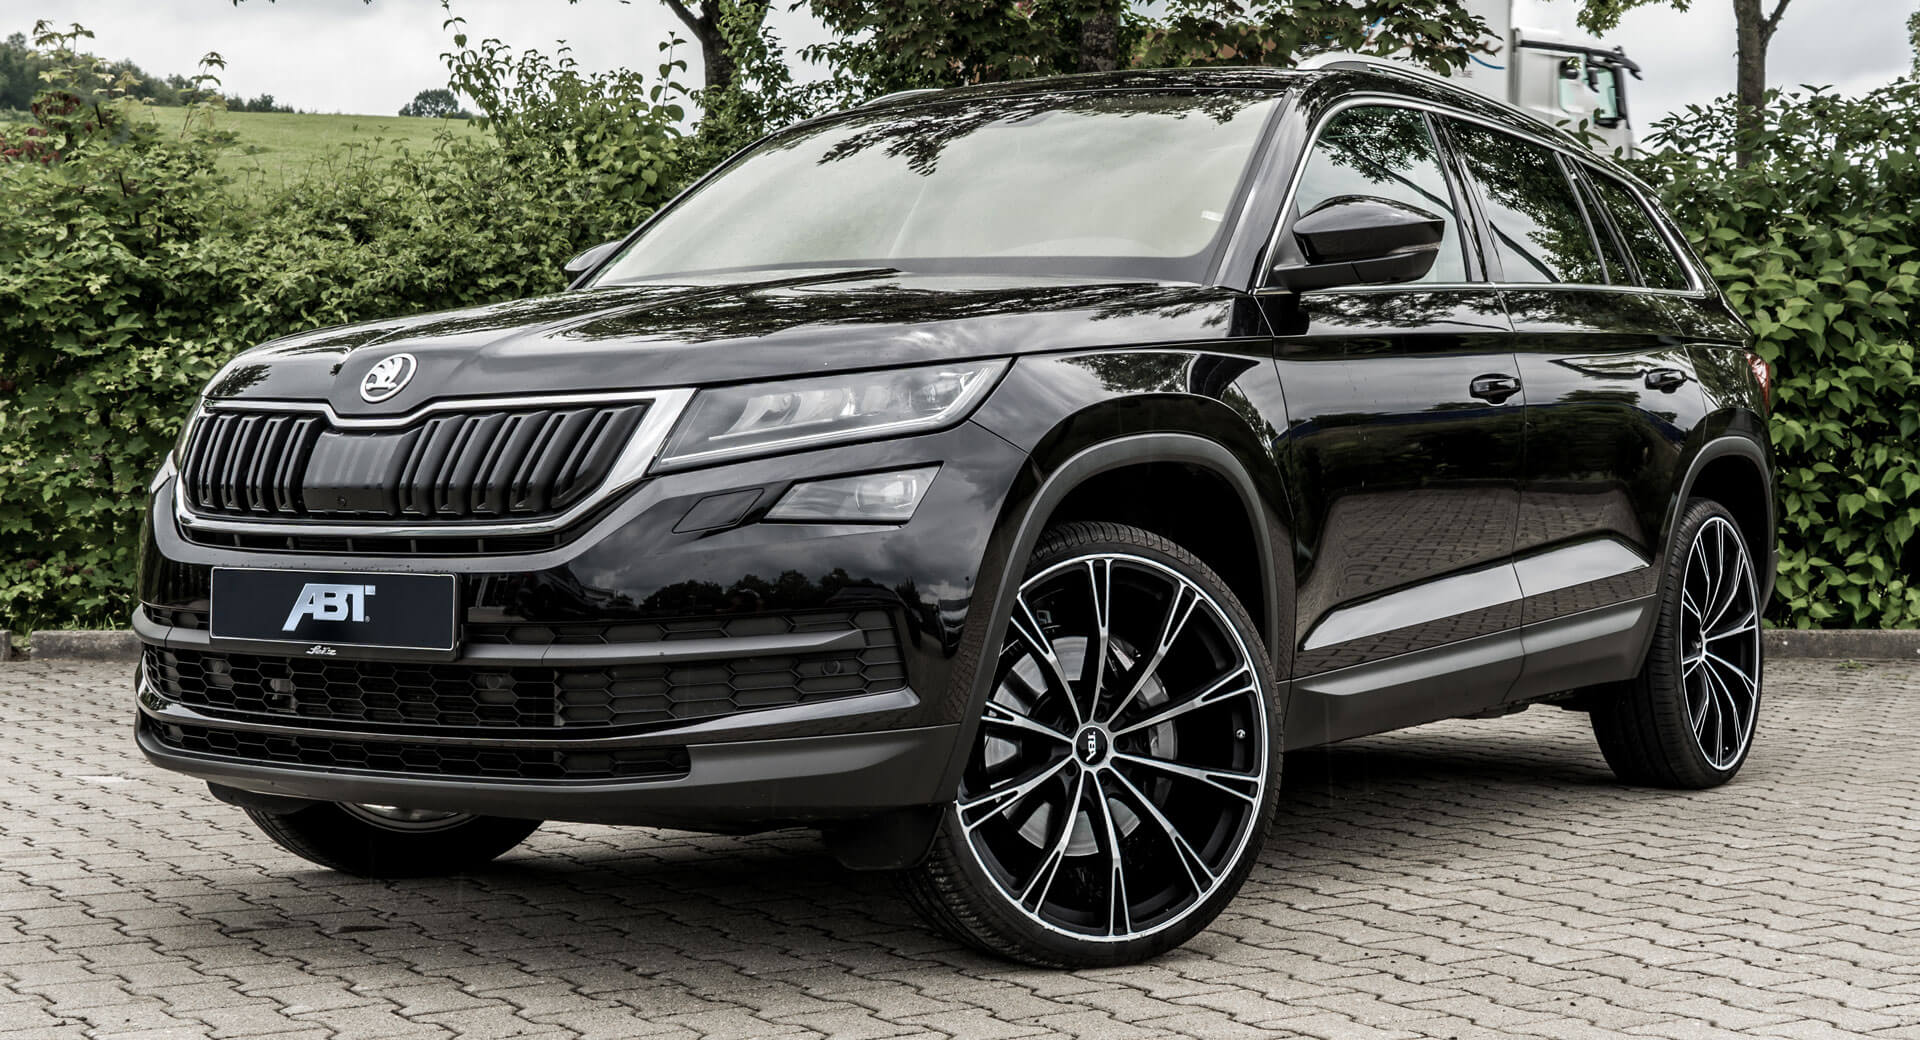 213 HP Skoda Kodiaq By ABT Is No RS, But It'll Have To Do If You Want More  Oomph